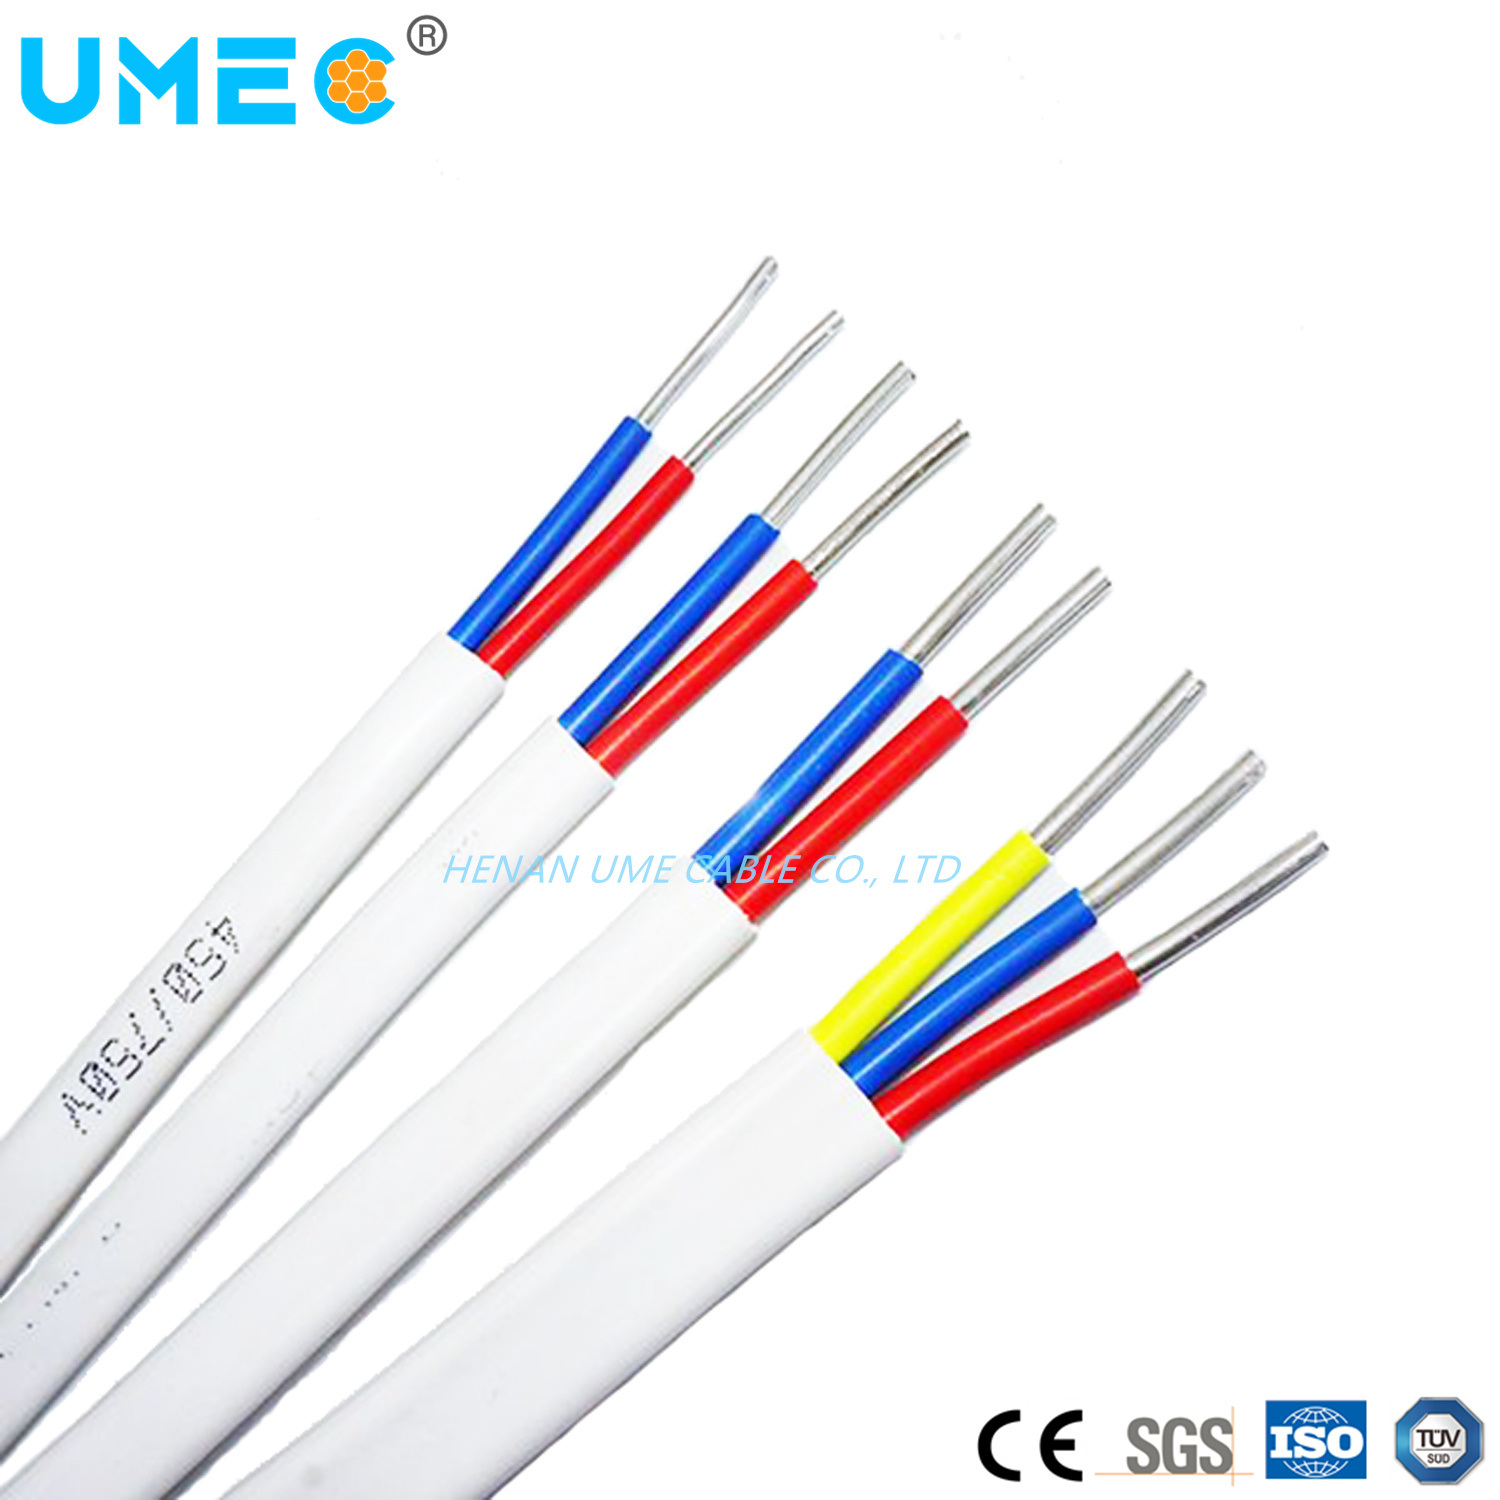 Factory Direct Free Sample BVVB Blvvb Type 2X1.5sqmm PVC Insulated Cable Electrical Wire for House Wiring Installation